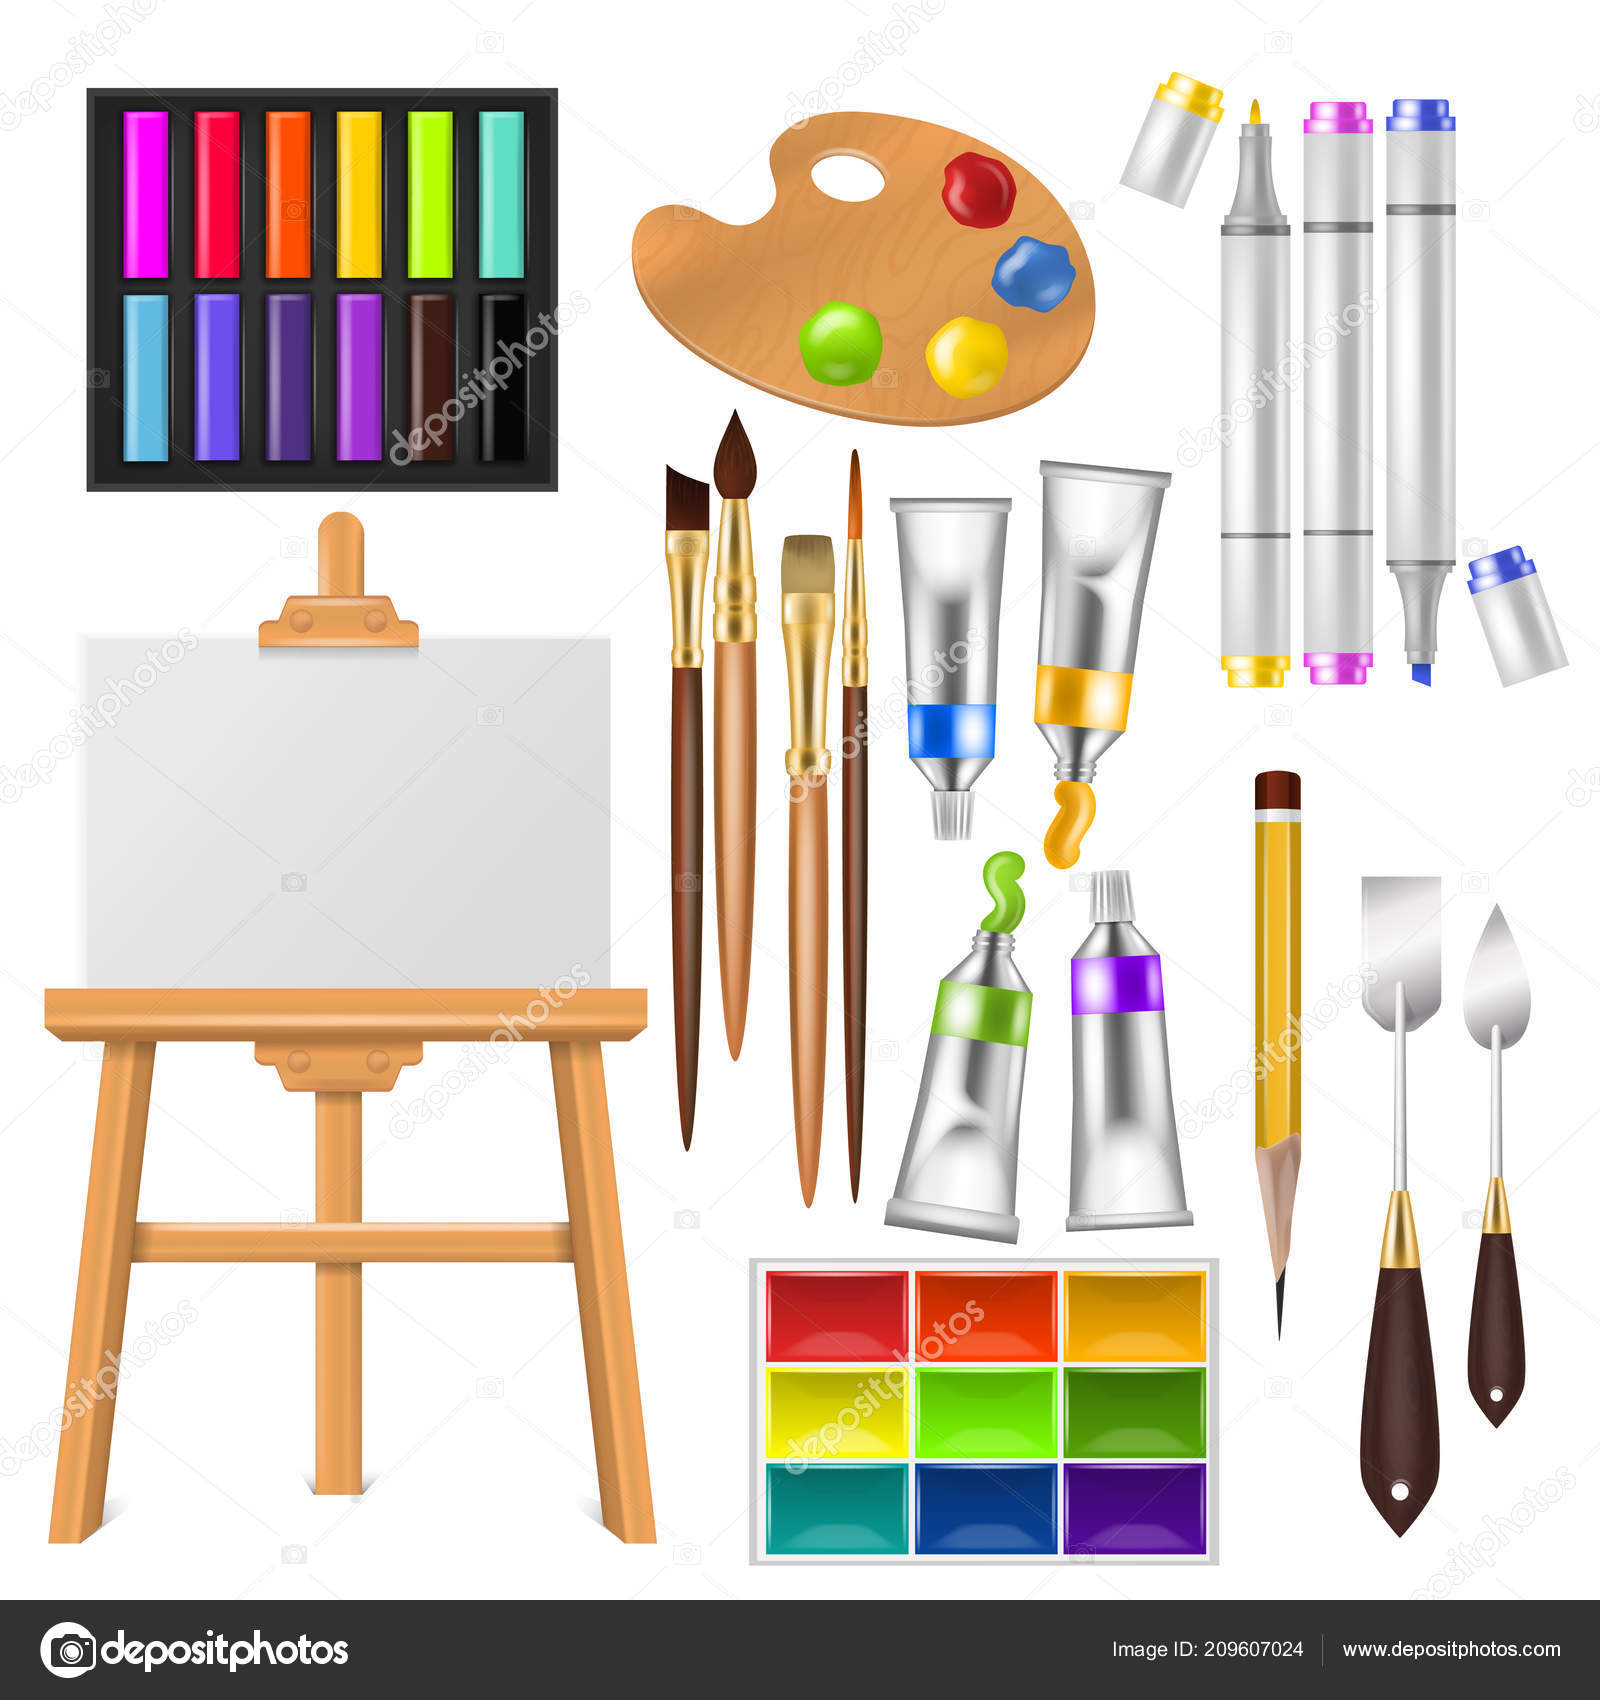 Many colored markers in package. Studio Photo, Stock image